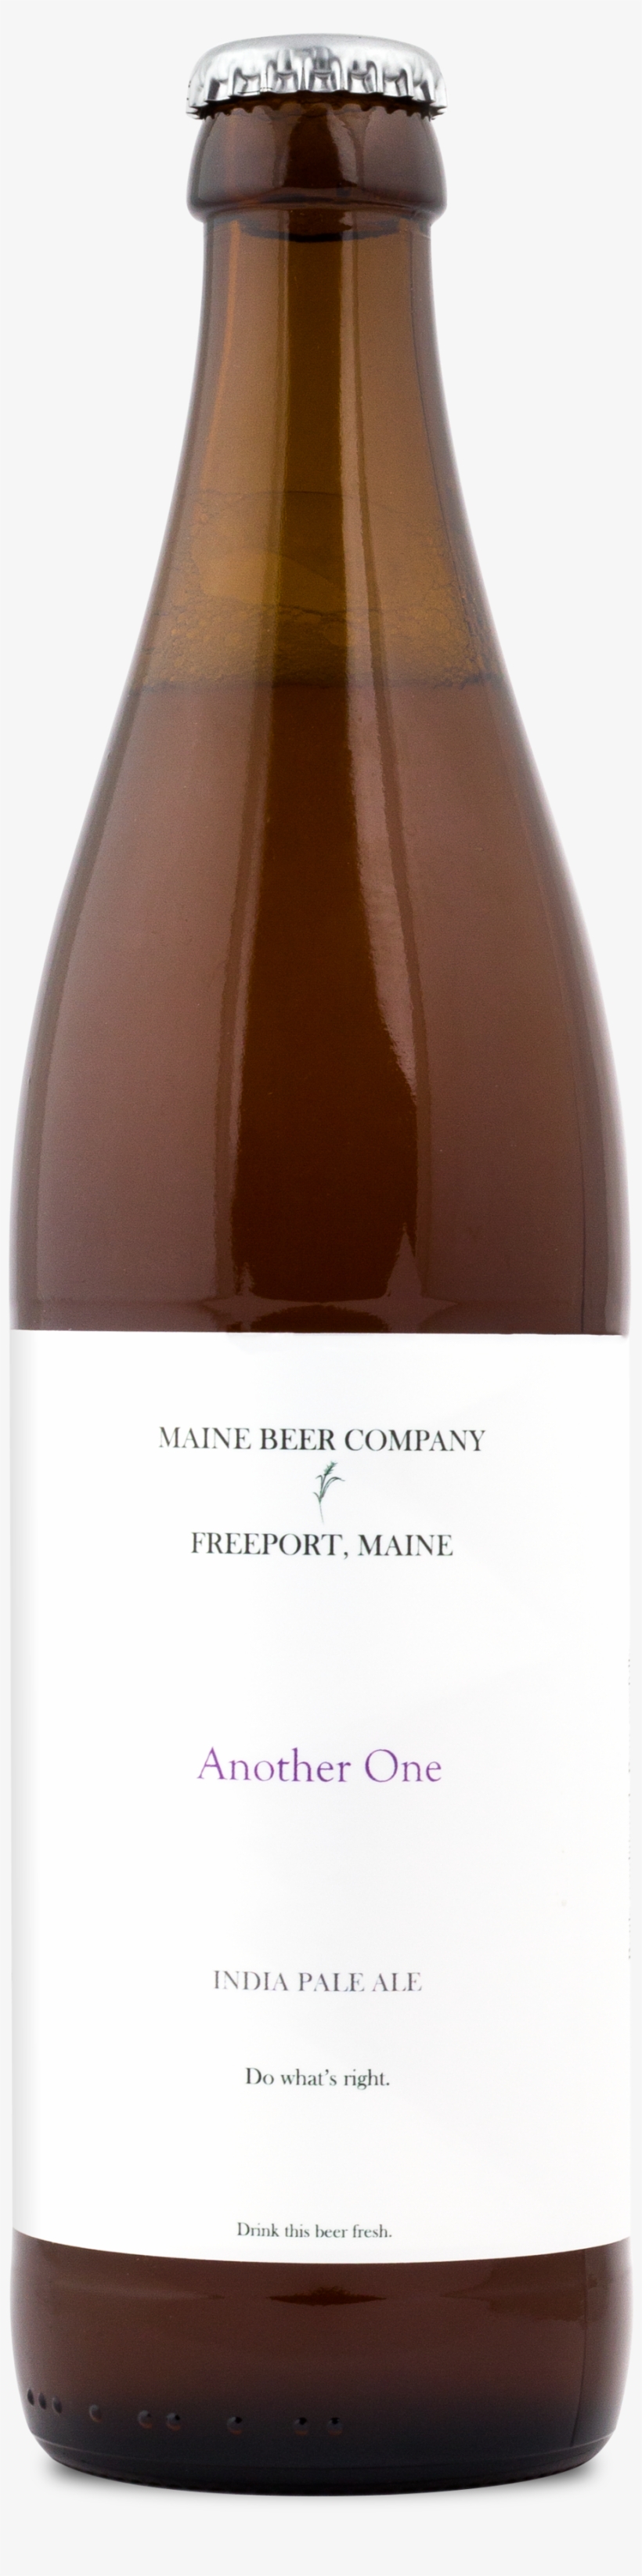 Our Beer - Maine Beer Company Woods & Waters, transparent png #4800560